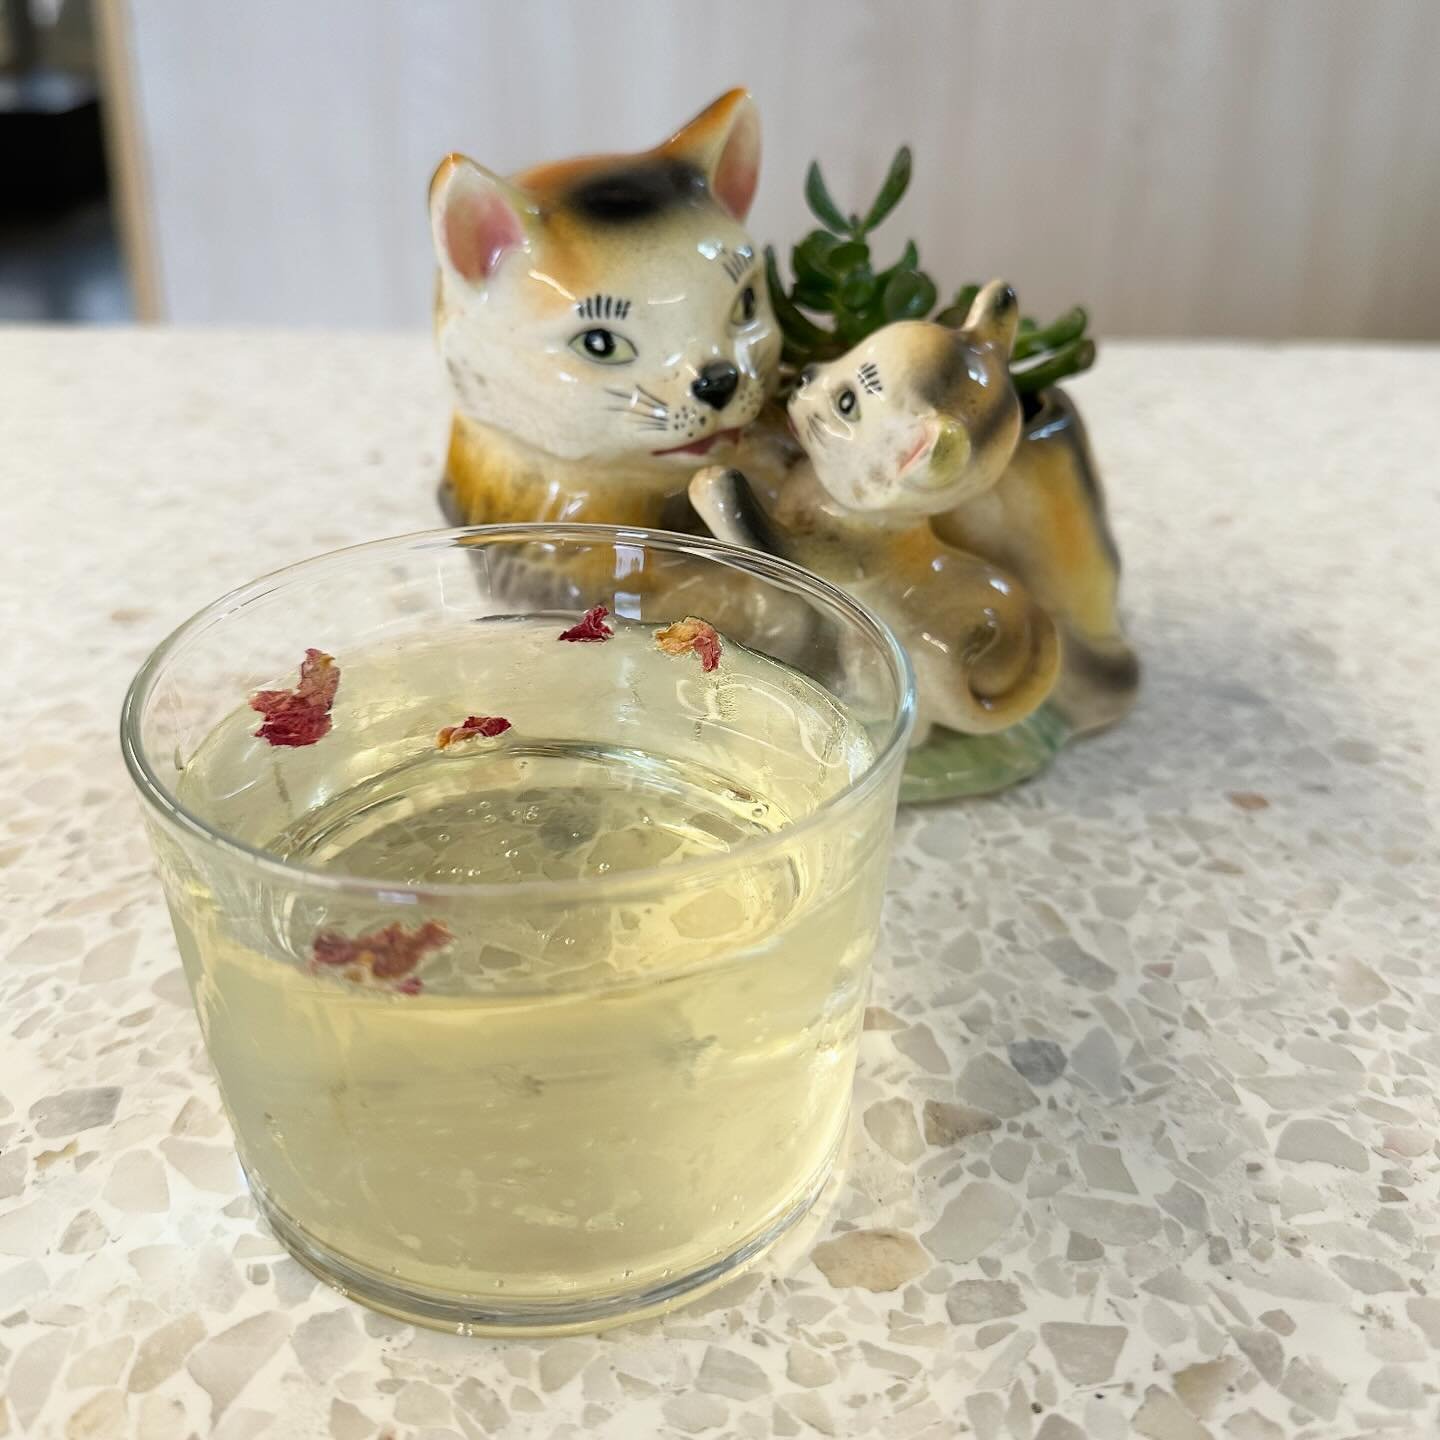 In celebration of Mother&rsquo;s Day, this weekend we will be featuring glasses of &ldquo;Rosecco&rdquo; (Prosecco with house made rose syrup) and cat-friendly bouquets by @auraandsoulfloral. As always on weekends, Cat Zone reservations are highly re